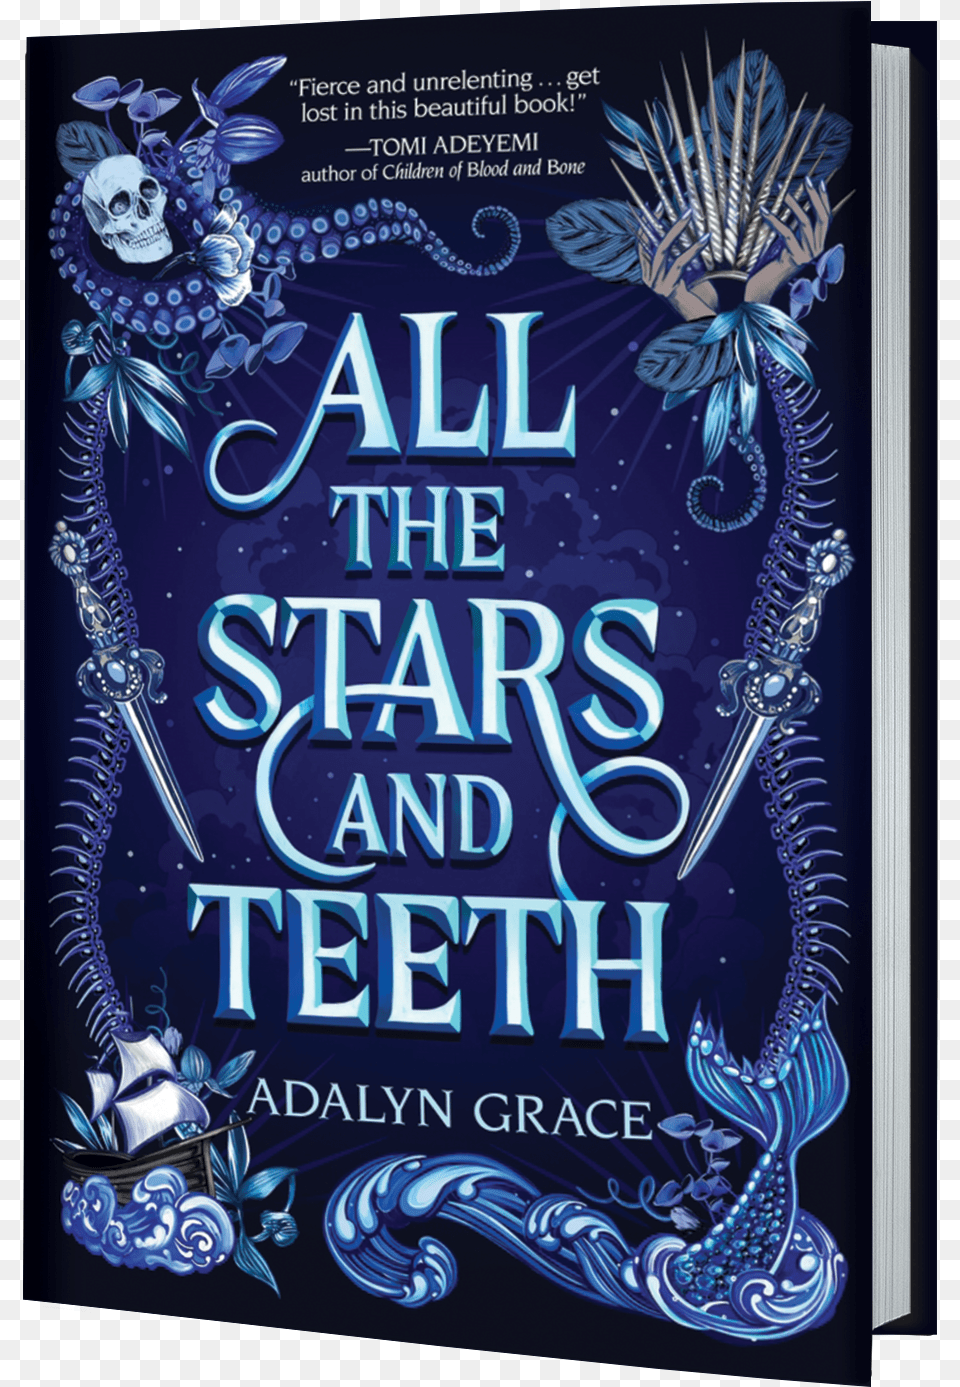 Adalyn Grace All The Stars And Teeth All The Stars And Teeth Adalyn Grace, Book, Publication, Novel, Blade Png